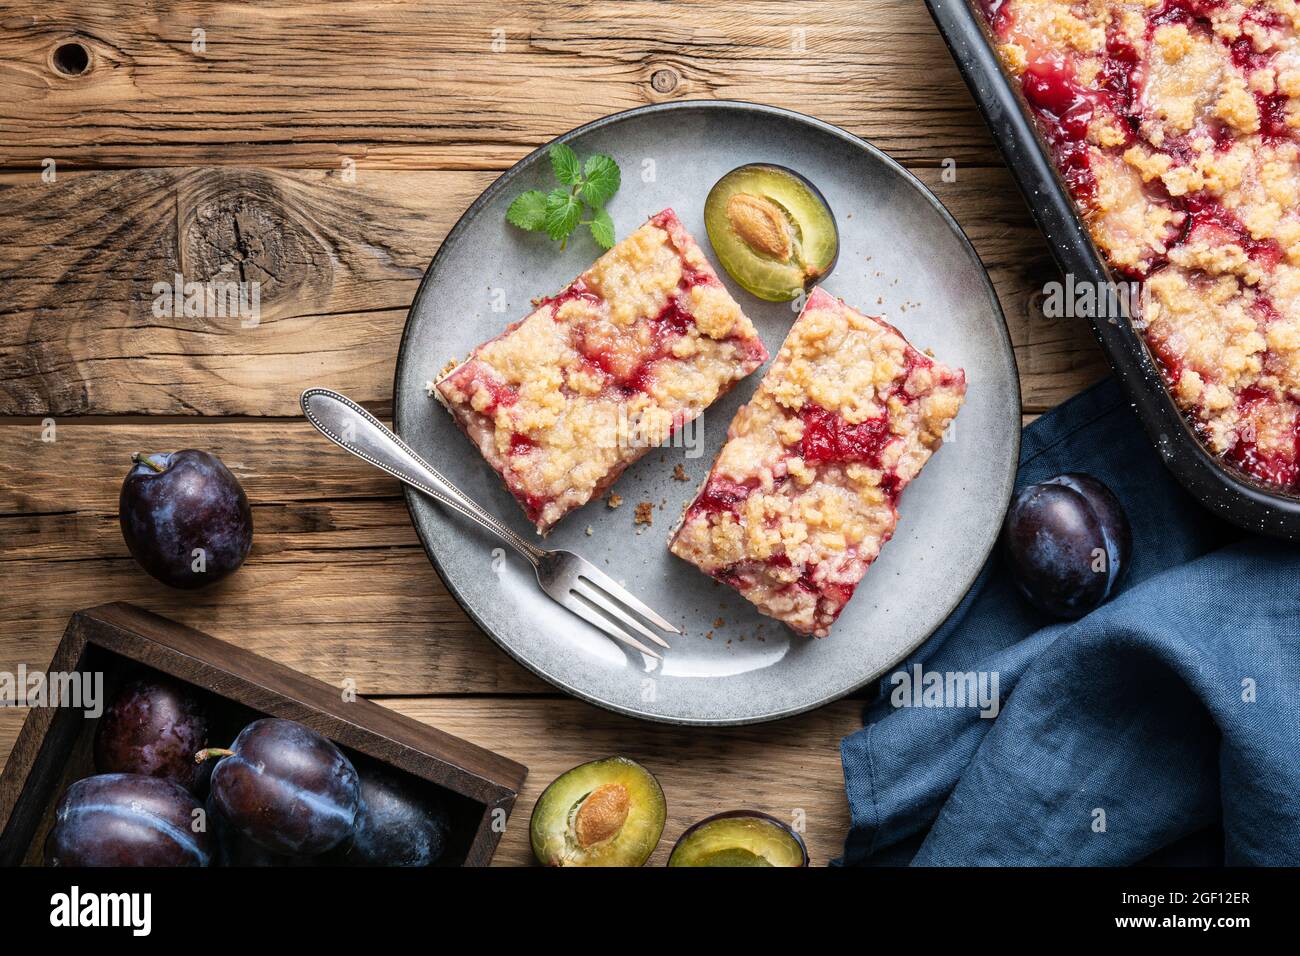 Juicy plum pie slices with crunchy streusel topping on rustic wooden background Stock Photo